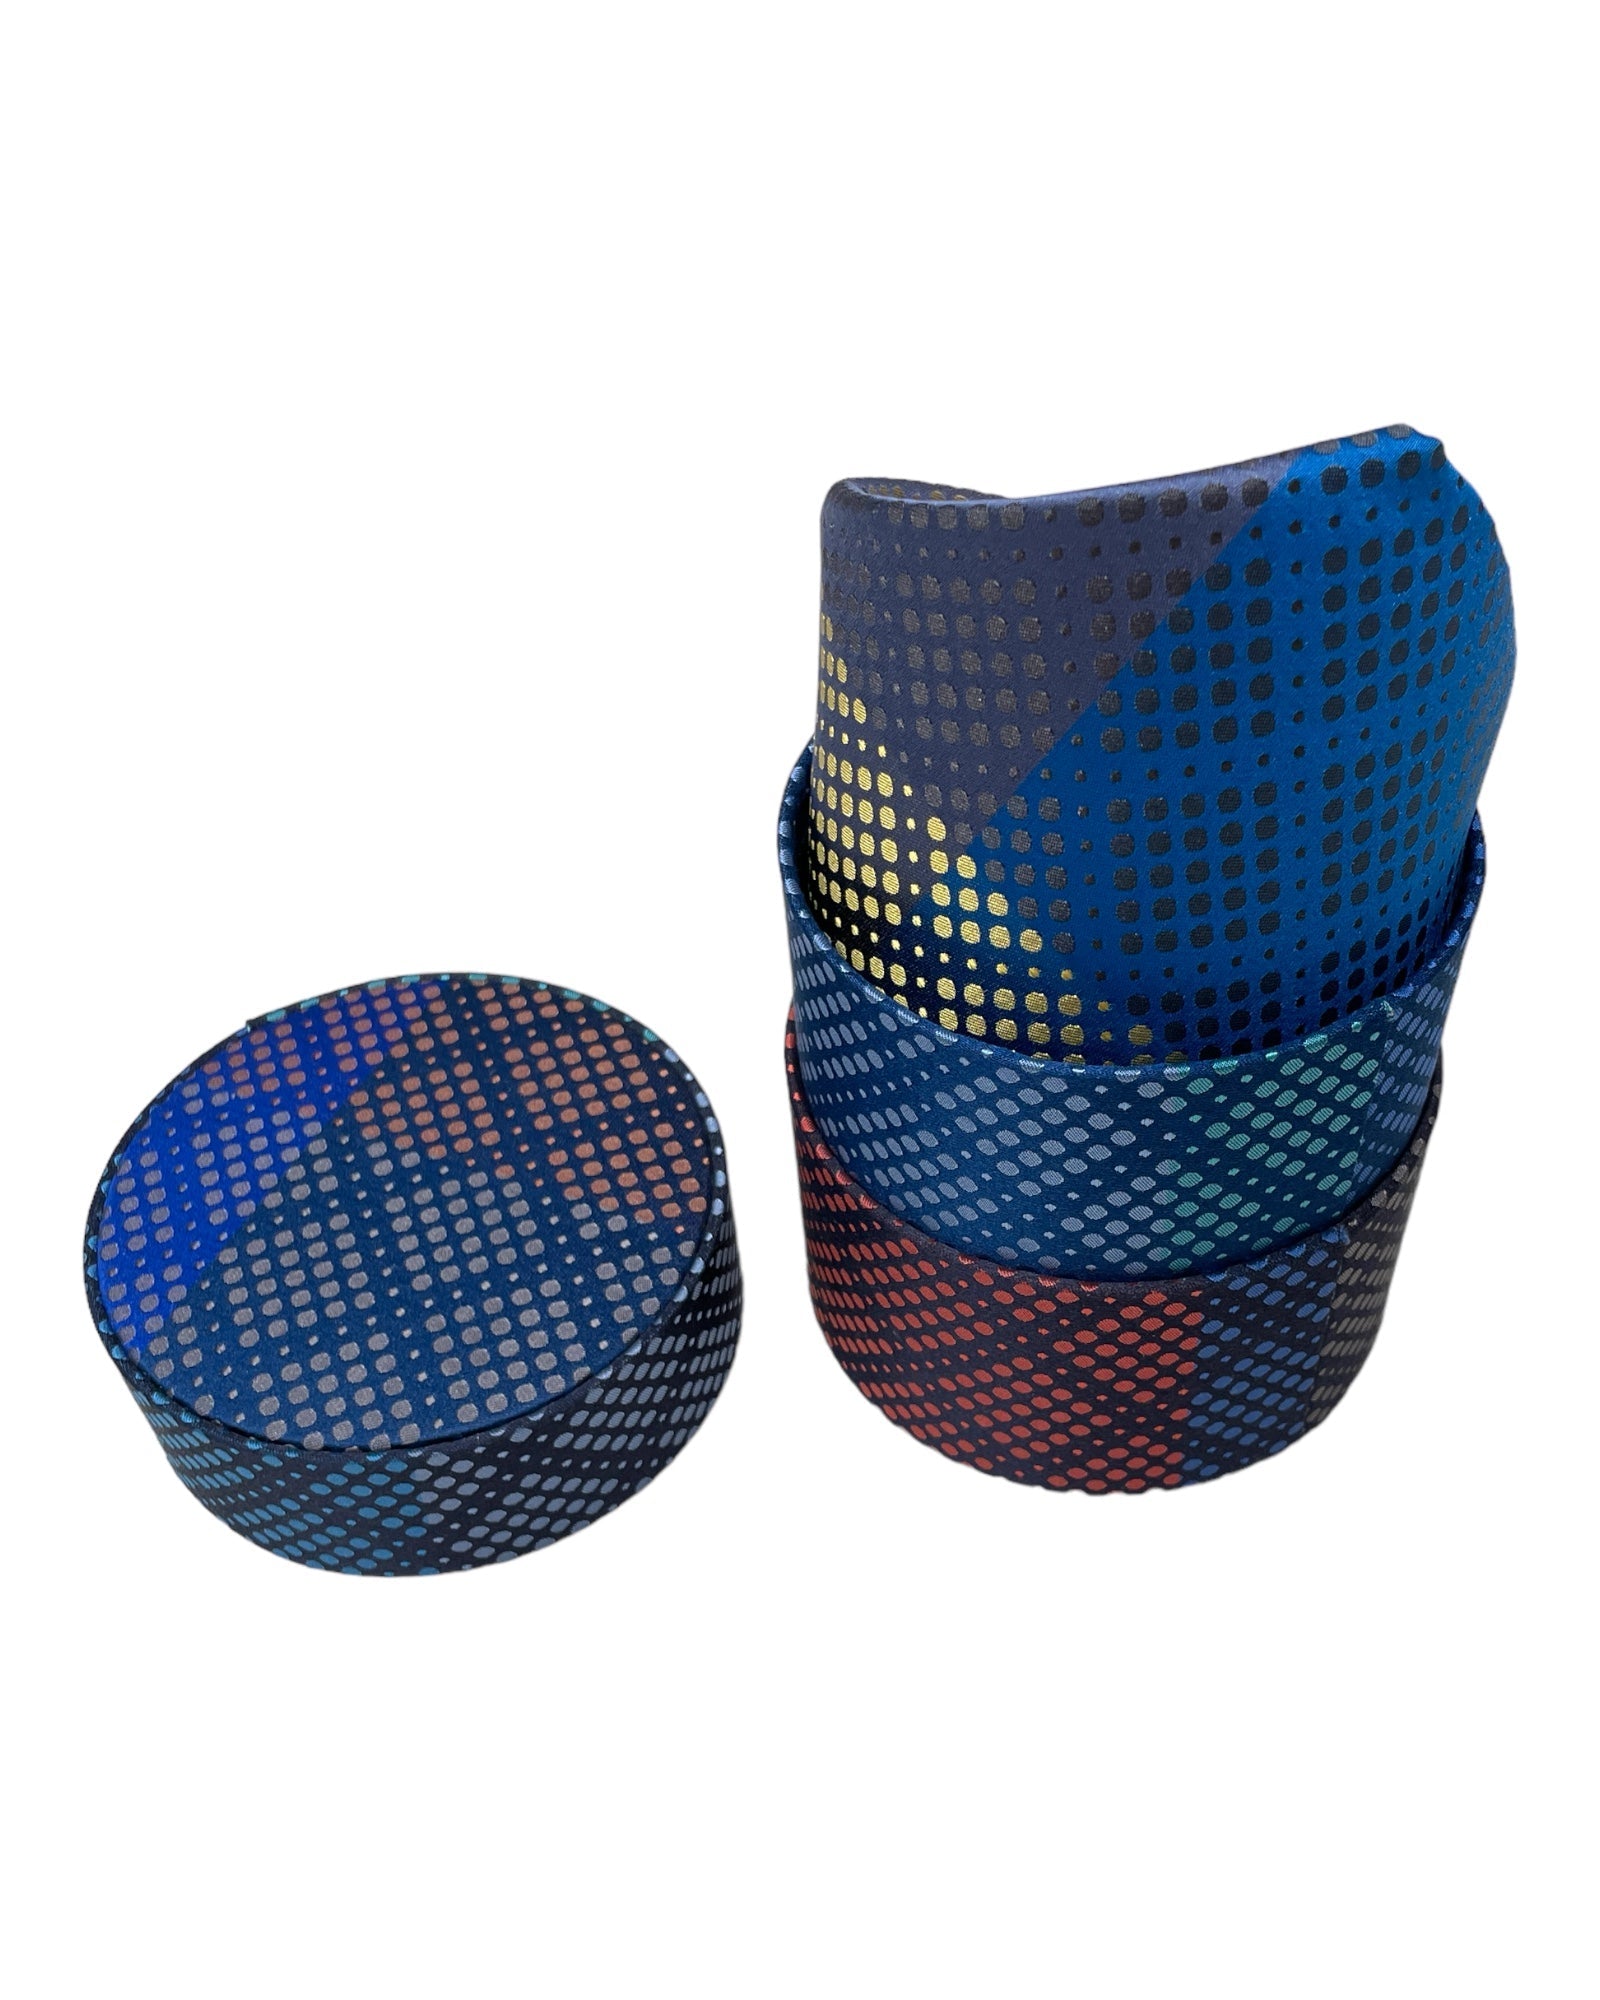 One-of-a-Kind Silk Tie - Multi colour Check TIES